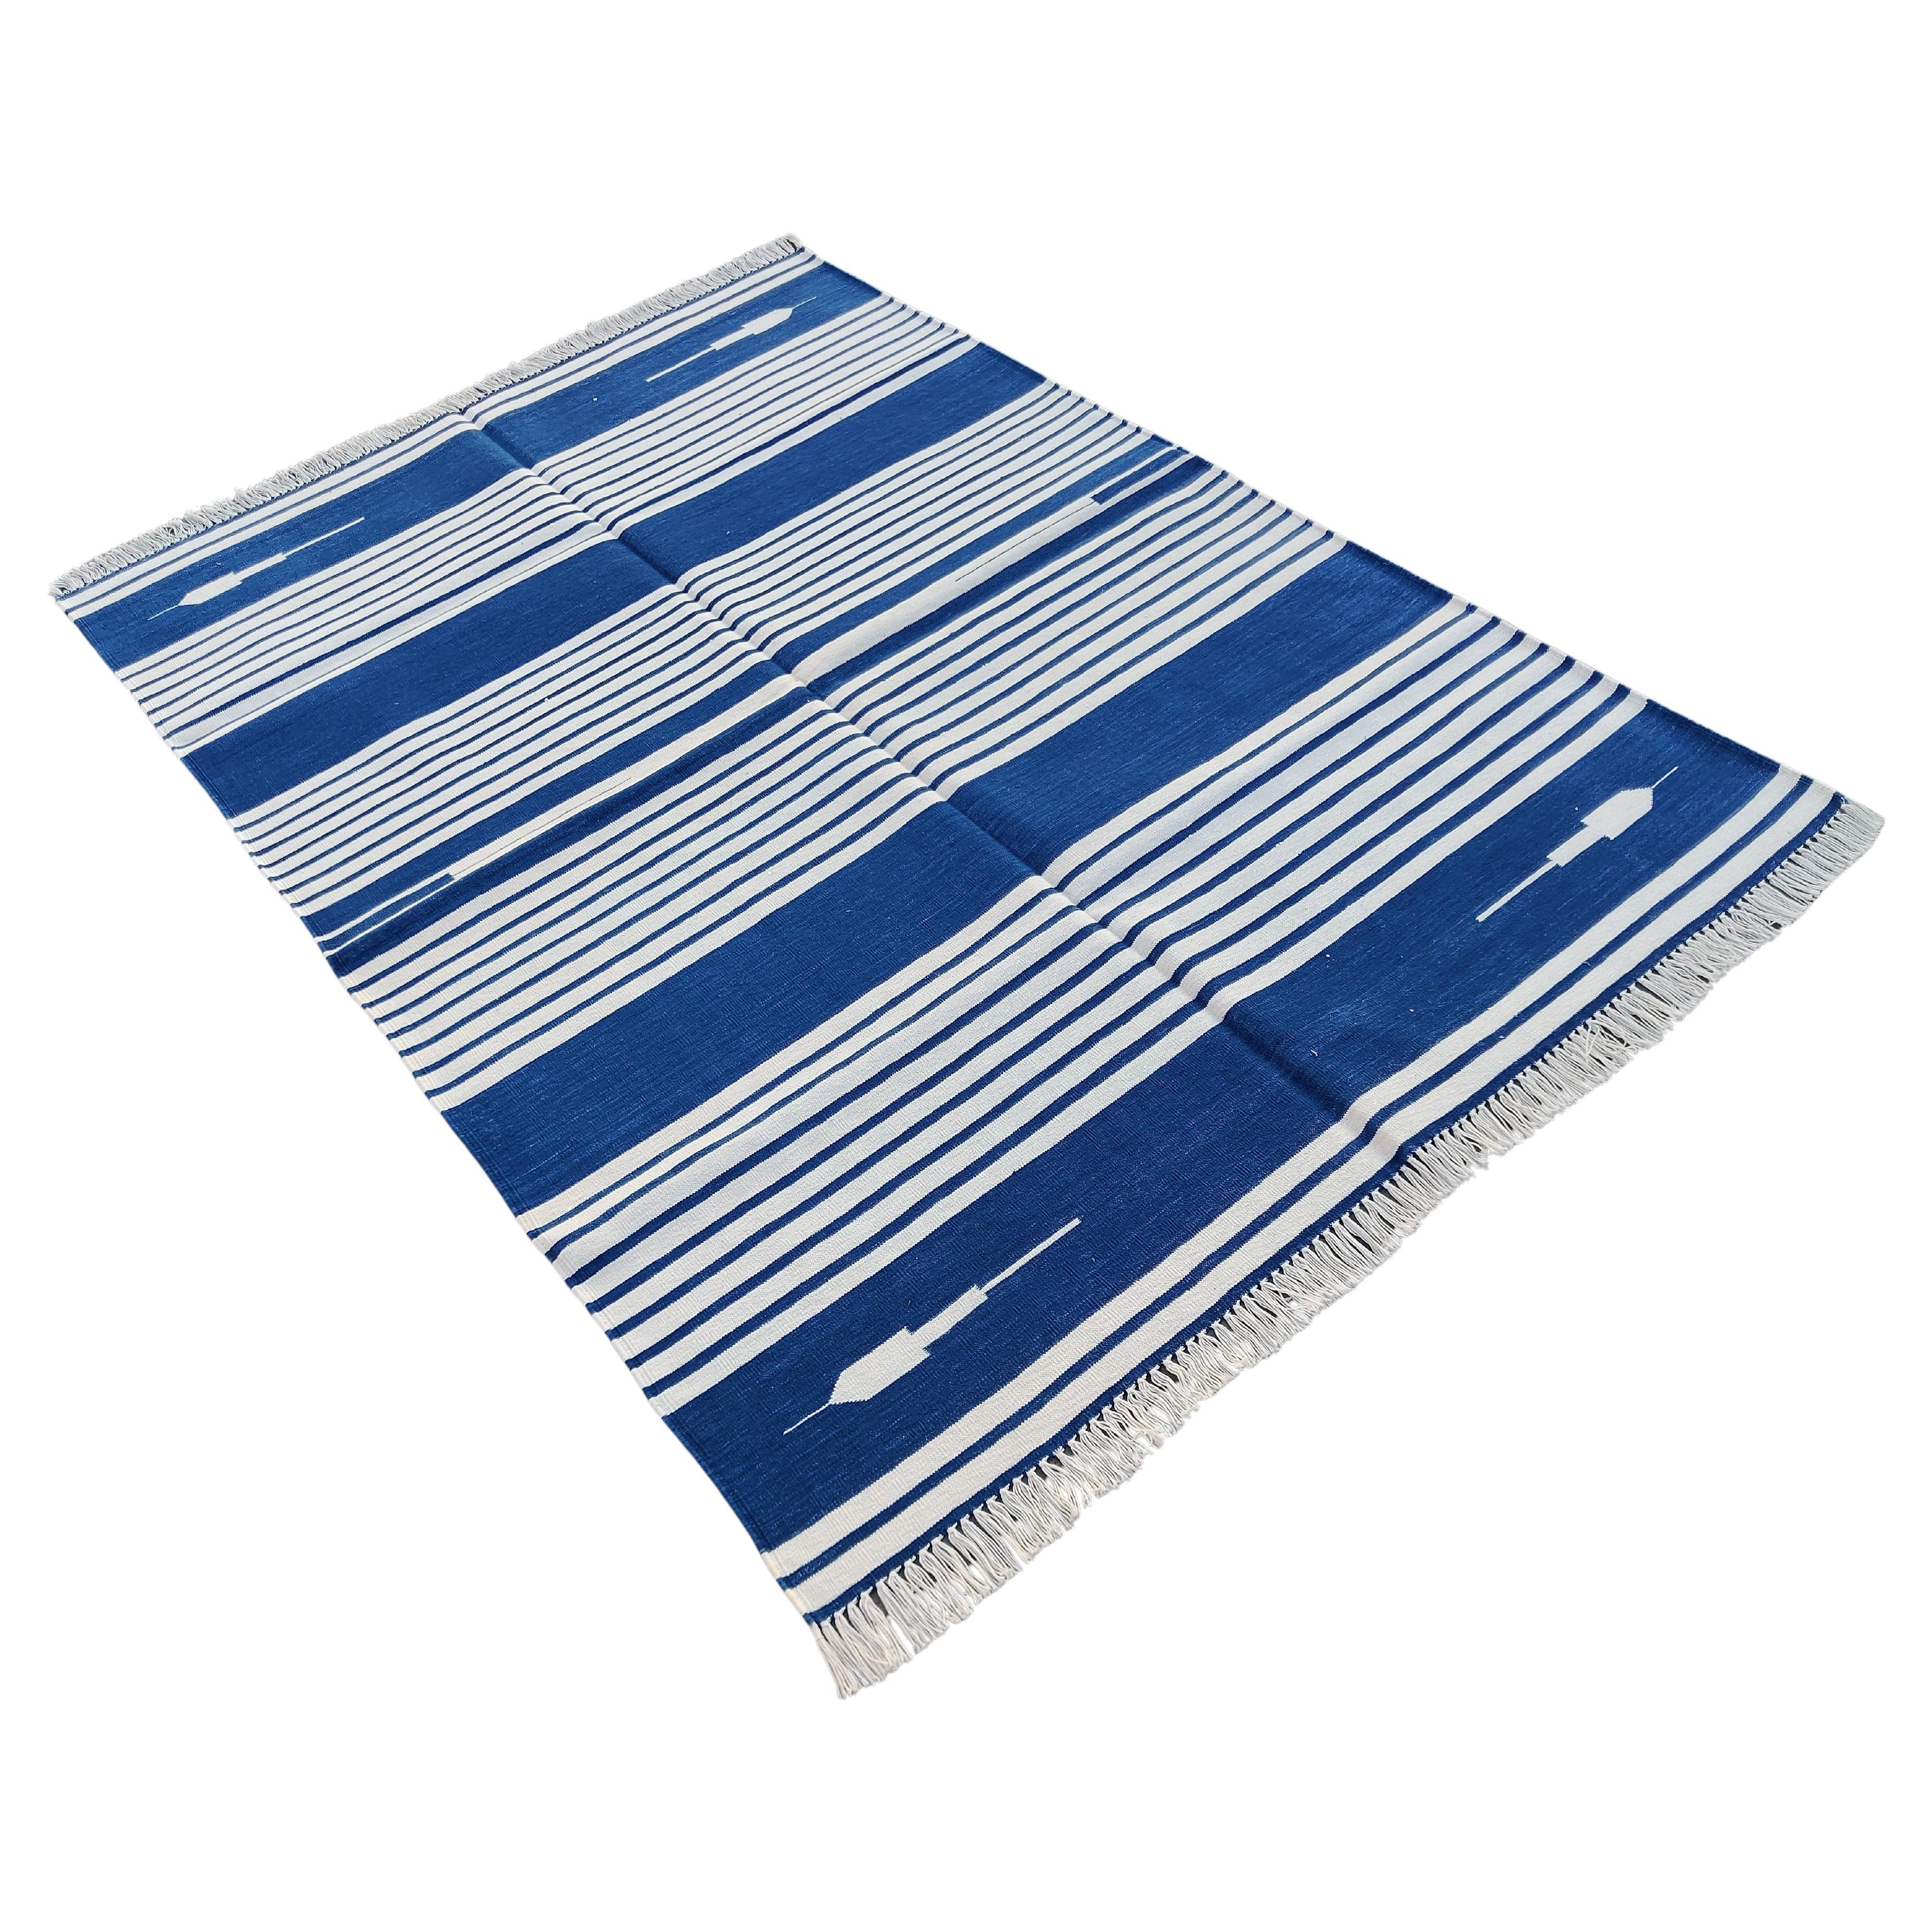 Handmade Cotton Area Flat Weave Rug, 4x6 Blue And White Striped Indian Dhurrie For Sale